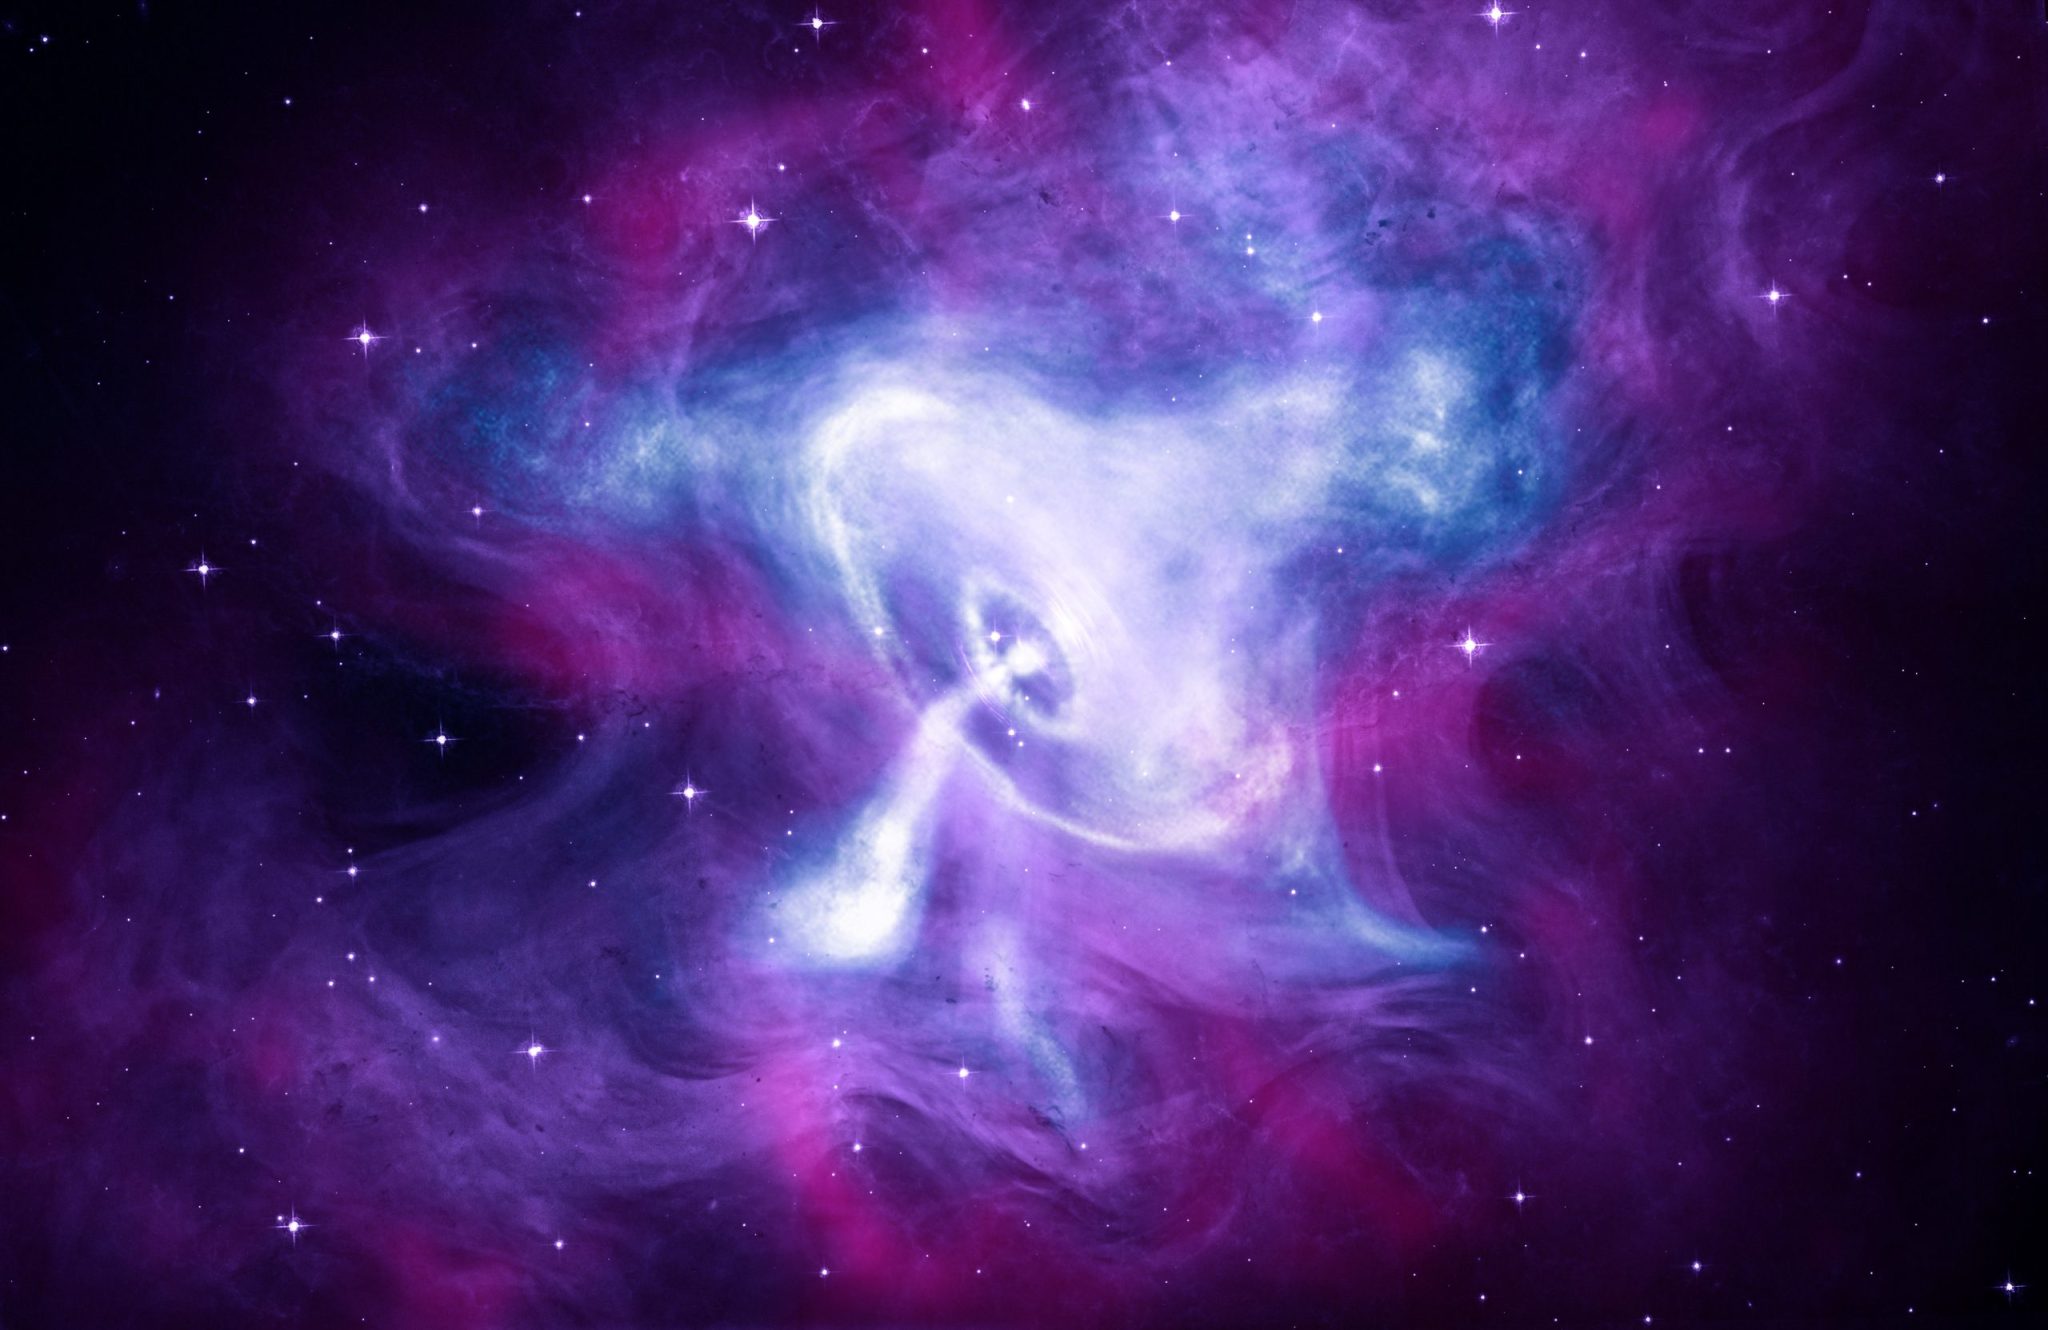 Composite image of the Crab Nebula with X-rays from NASA’s Chandra X-ray Observatory (blue and white), optical light from NASA’s Hubble Space Telescope (purple), and infrared light from NASA’s Spitzer Space Telescope (pink).